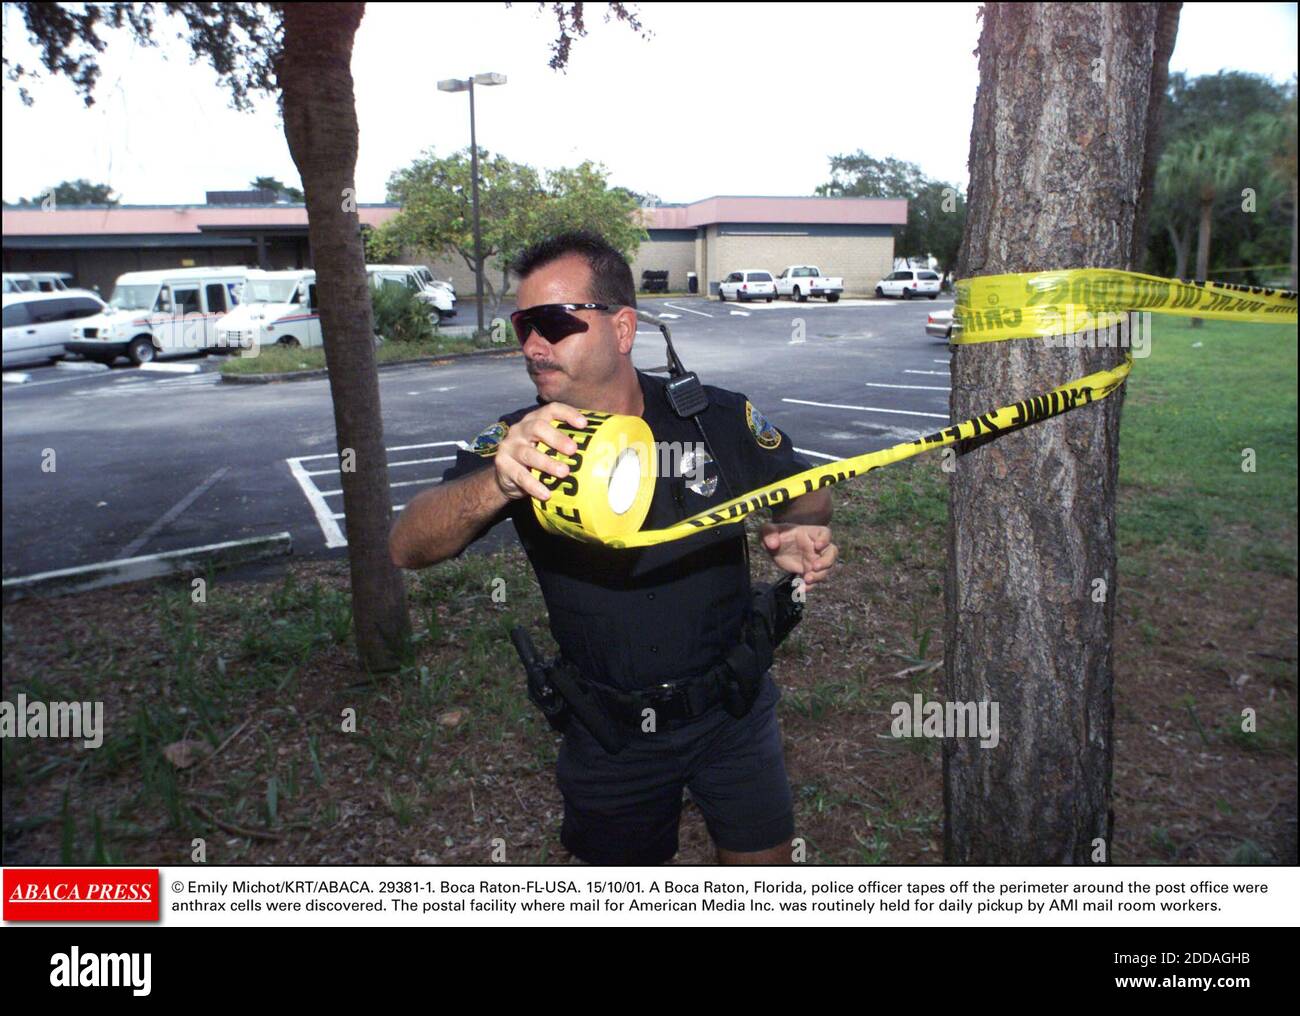 NO FILM, NO VIDEO, NO TV, NO DOCUMENTARY - © Emily Michot/KRT/ABACA. 29381-1. Boca Raton-FL-USA. 15/10/01. A Boca Raton, Florida, police officer tapes off the perimeter around the post office were anthrax cells were discovered. The postal facility where mail for American Media Inc. was routinely h Stock Photo